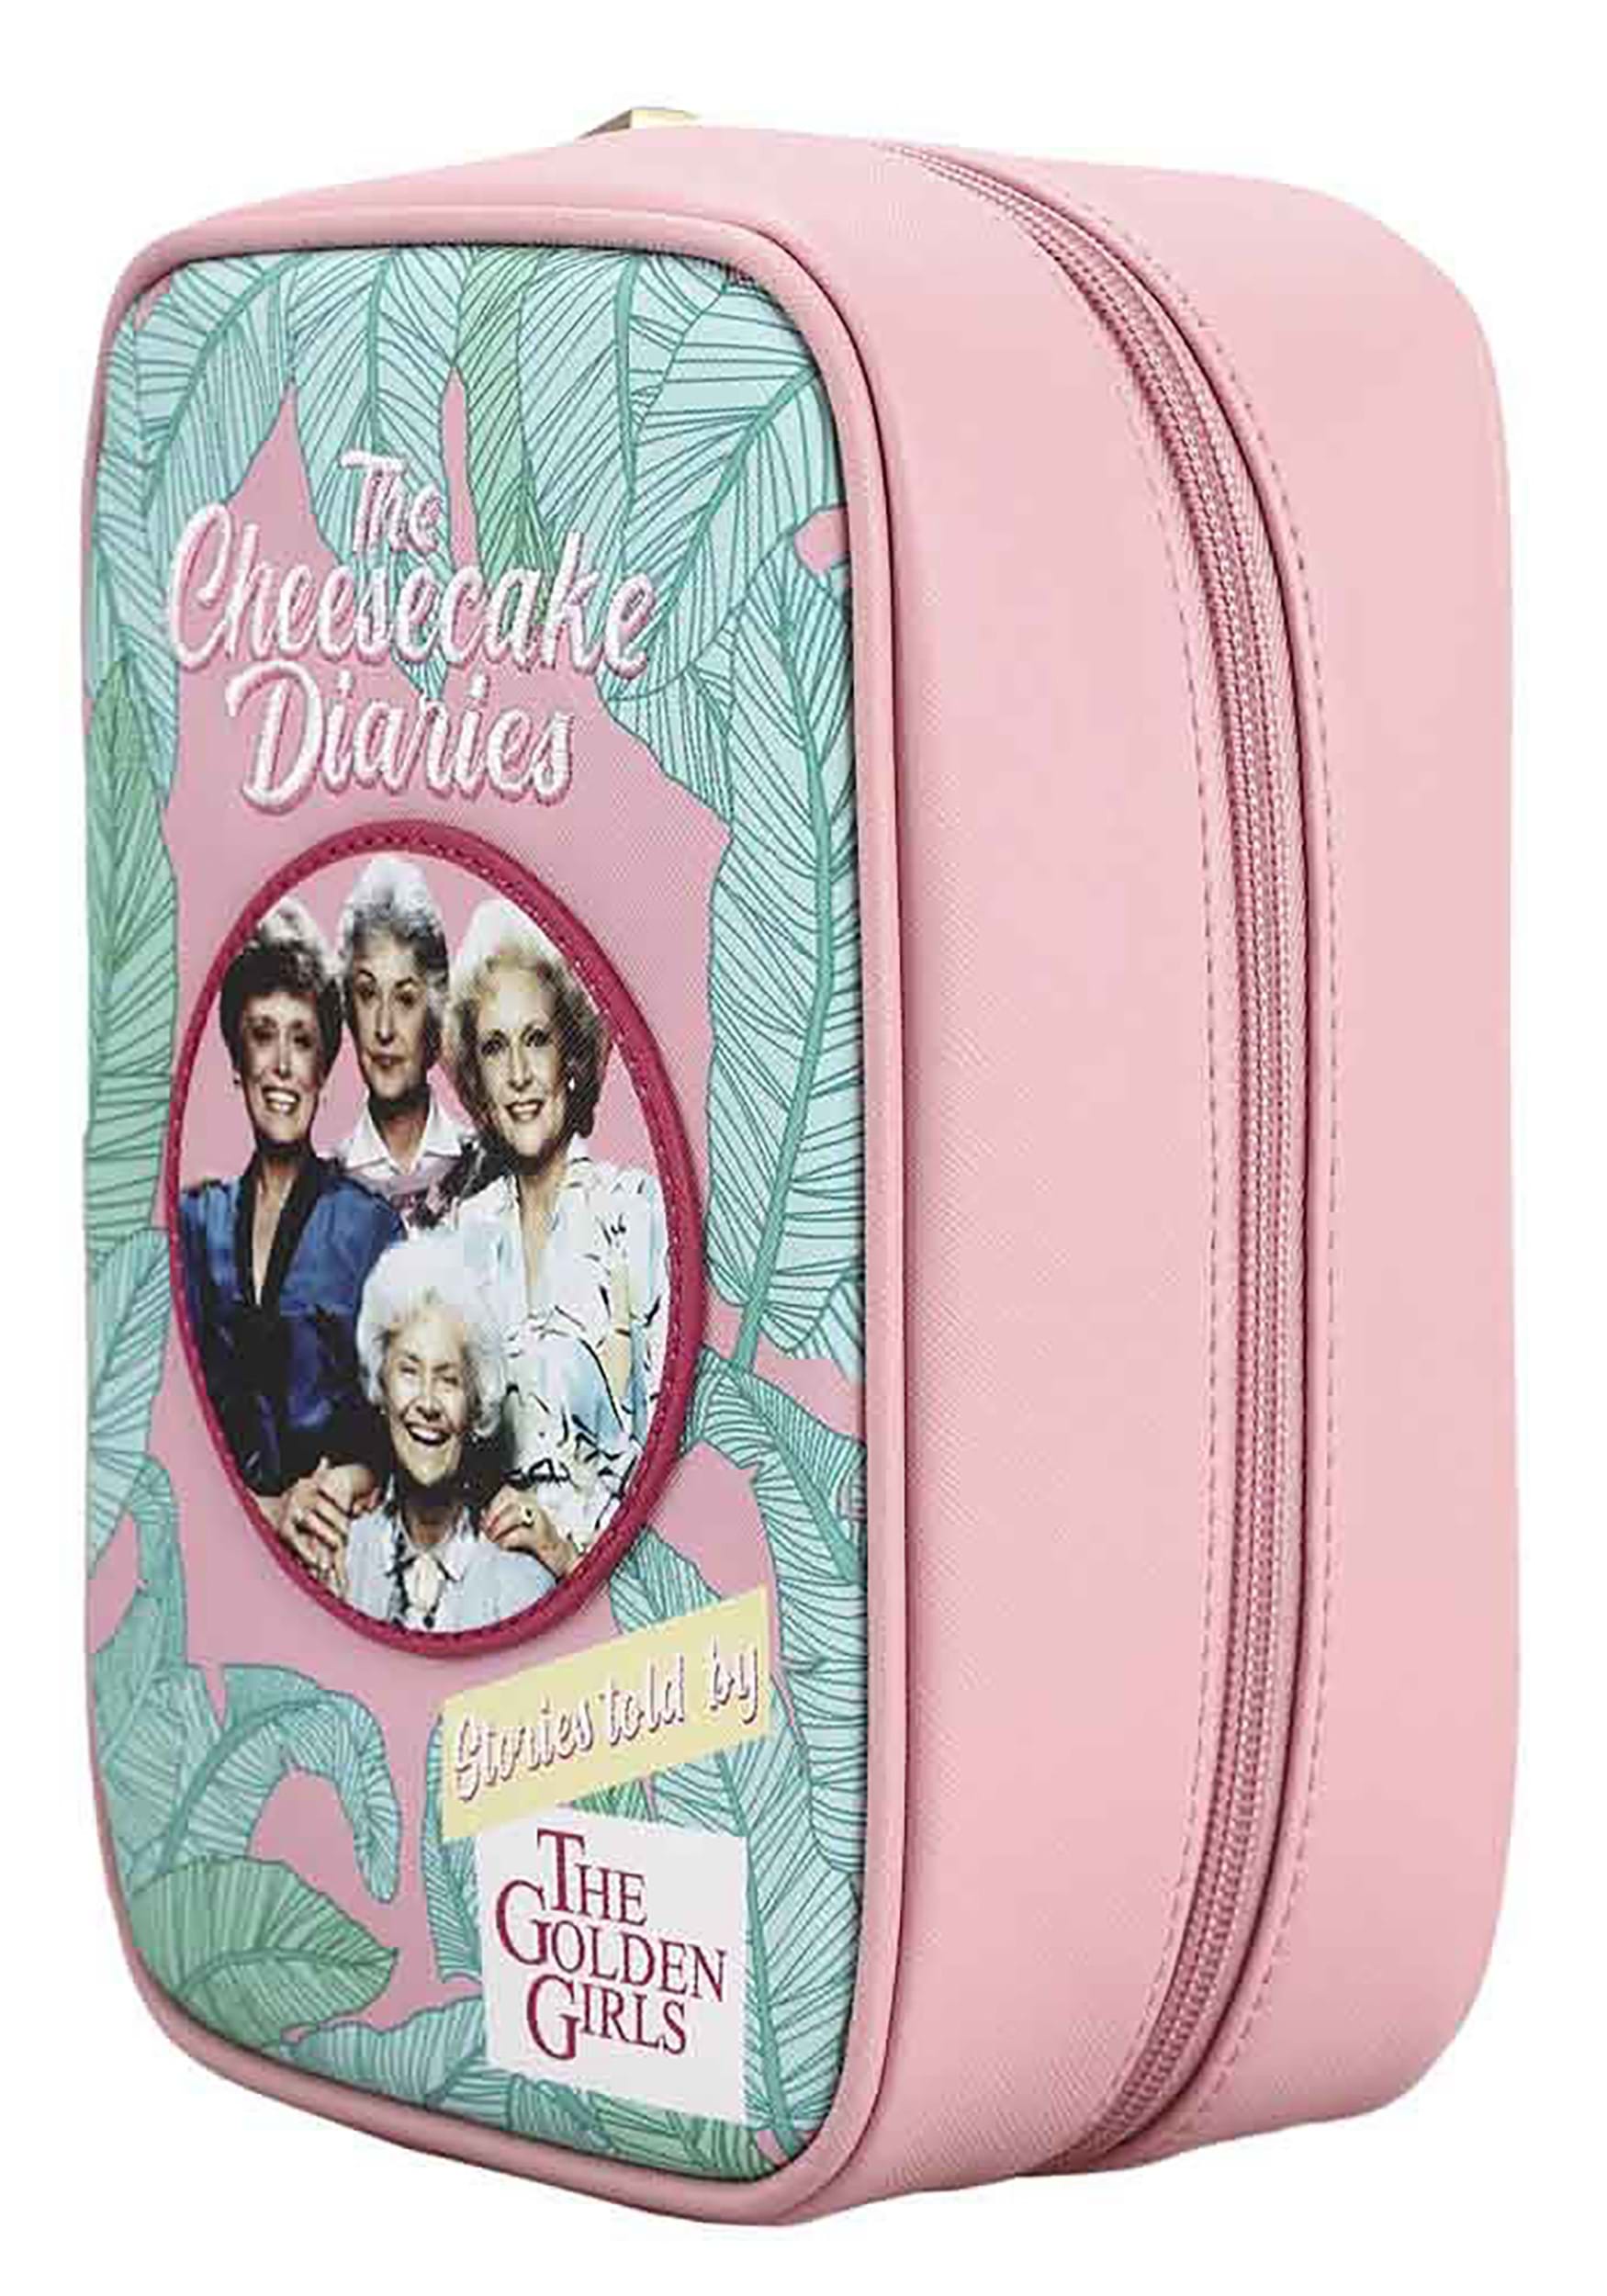 The Cheesecake Diaries The Golden Girls Travel Cosmetic Bag